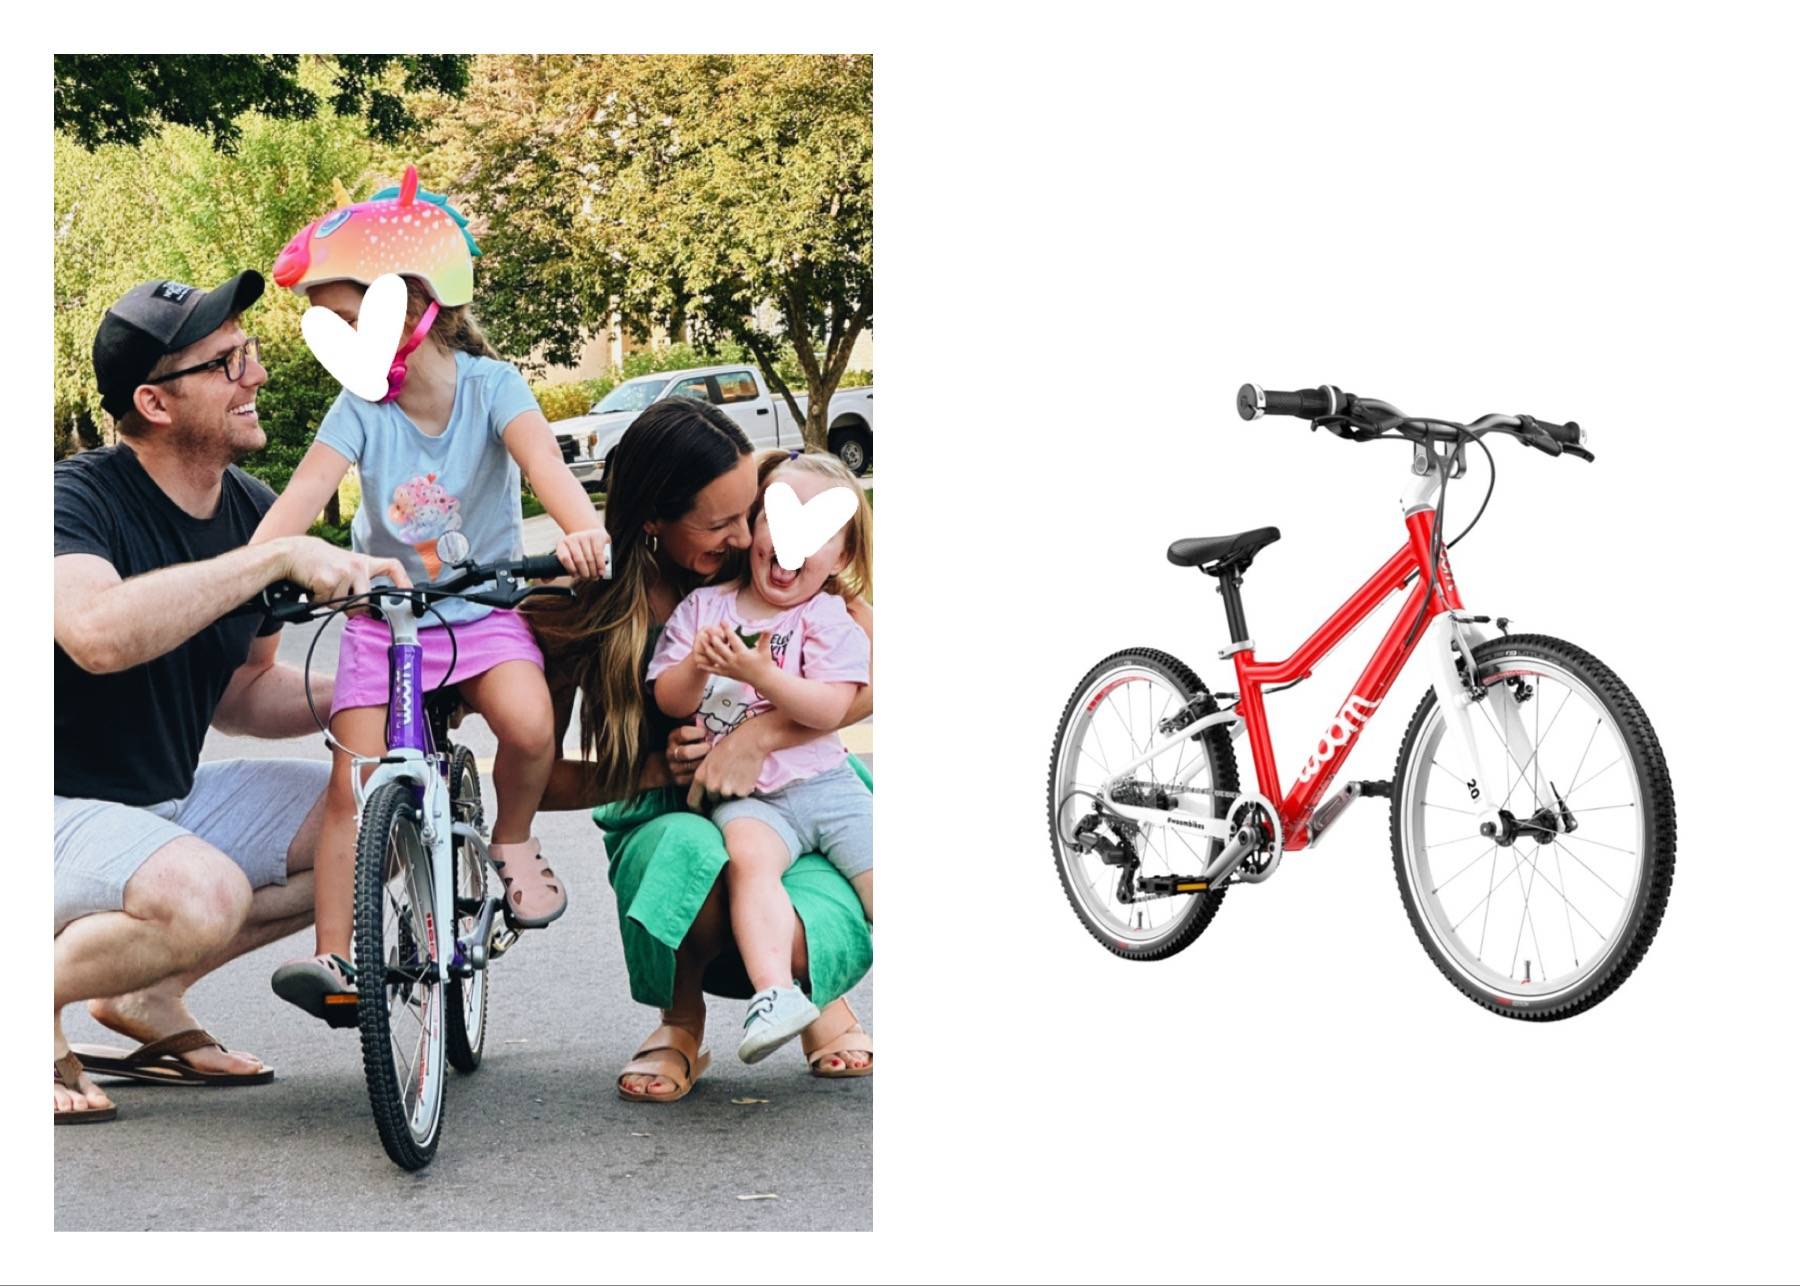 Family getting ready to go on a bike ride next to a stock photo of a red bike.